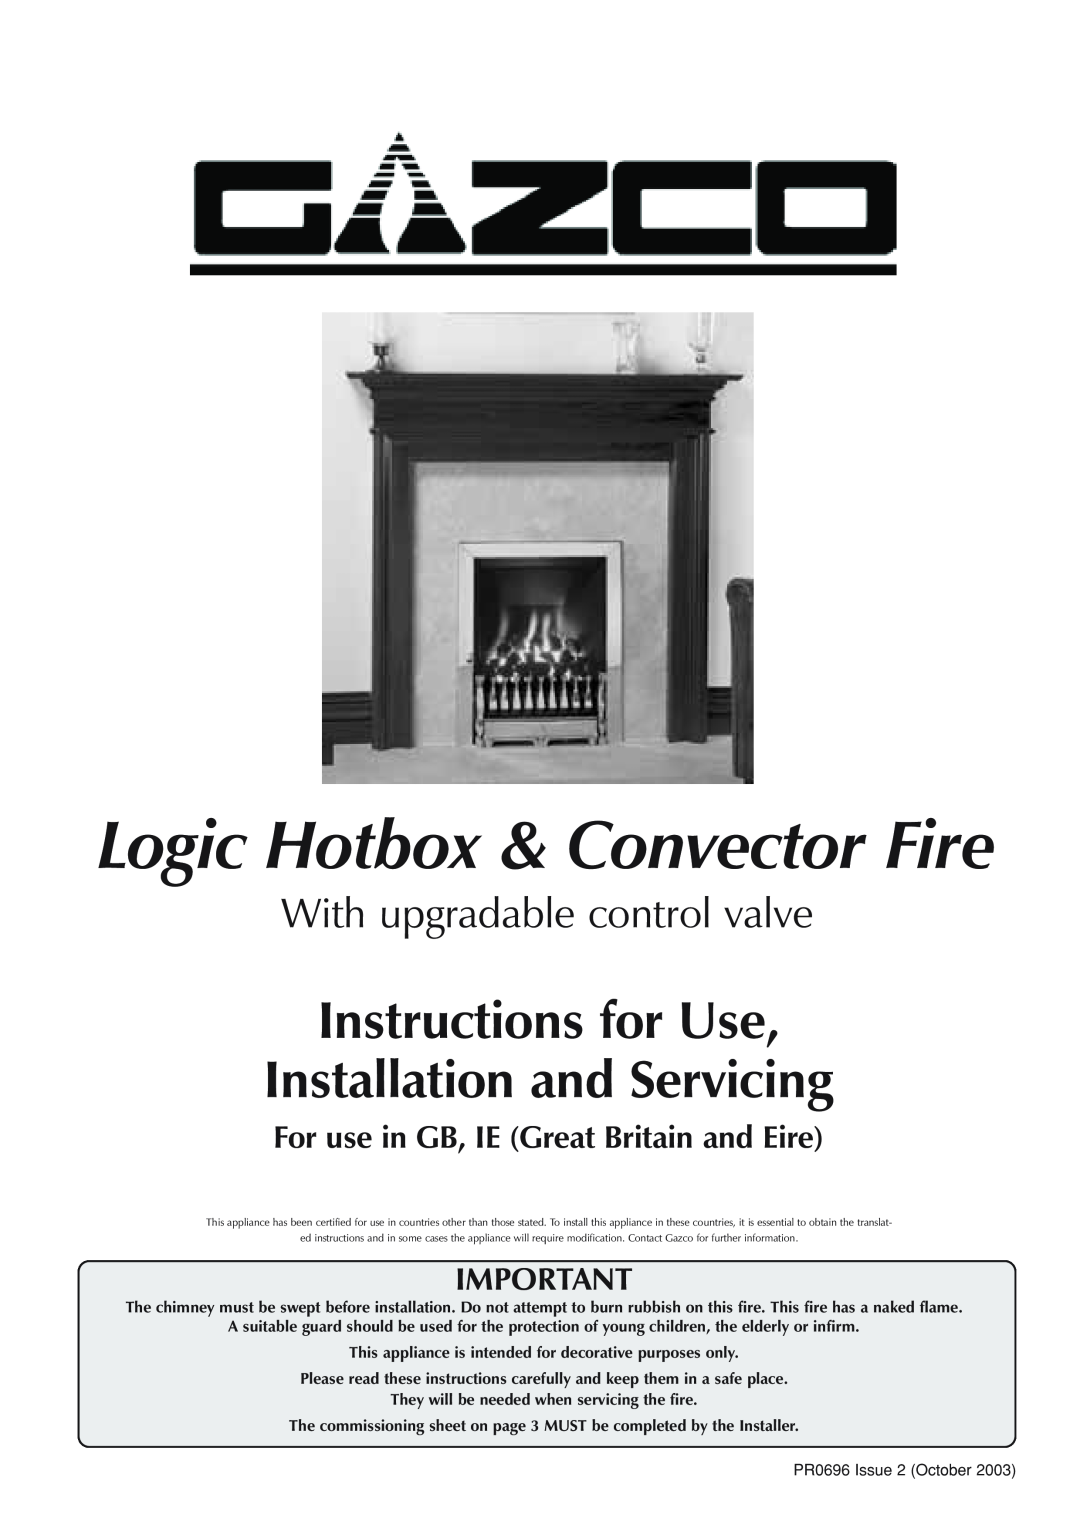 Stovax Logic Hotbox & Convector Fire manual Instructions for Use Installation and Servicing, With upgradable control valve 